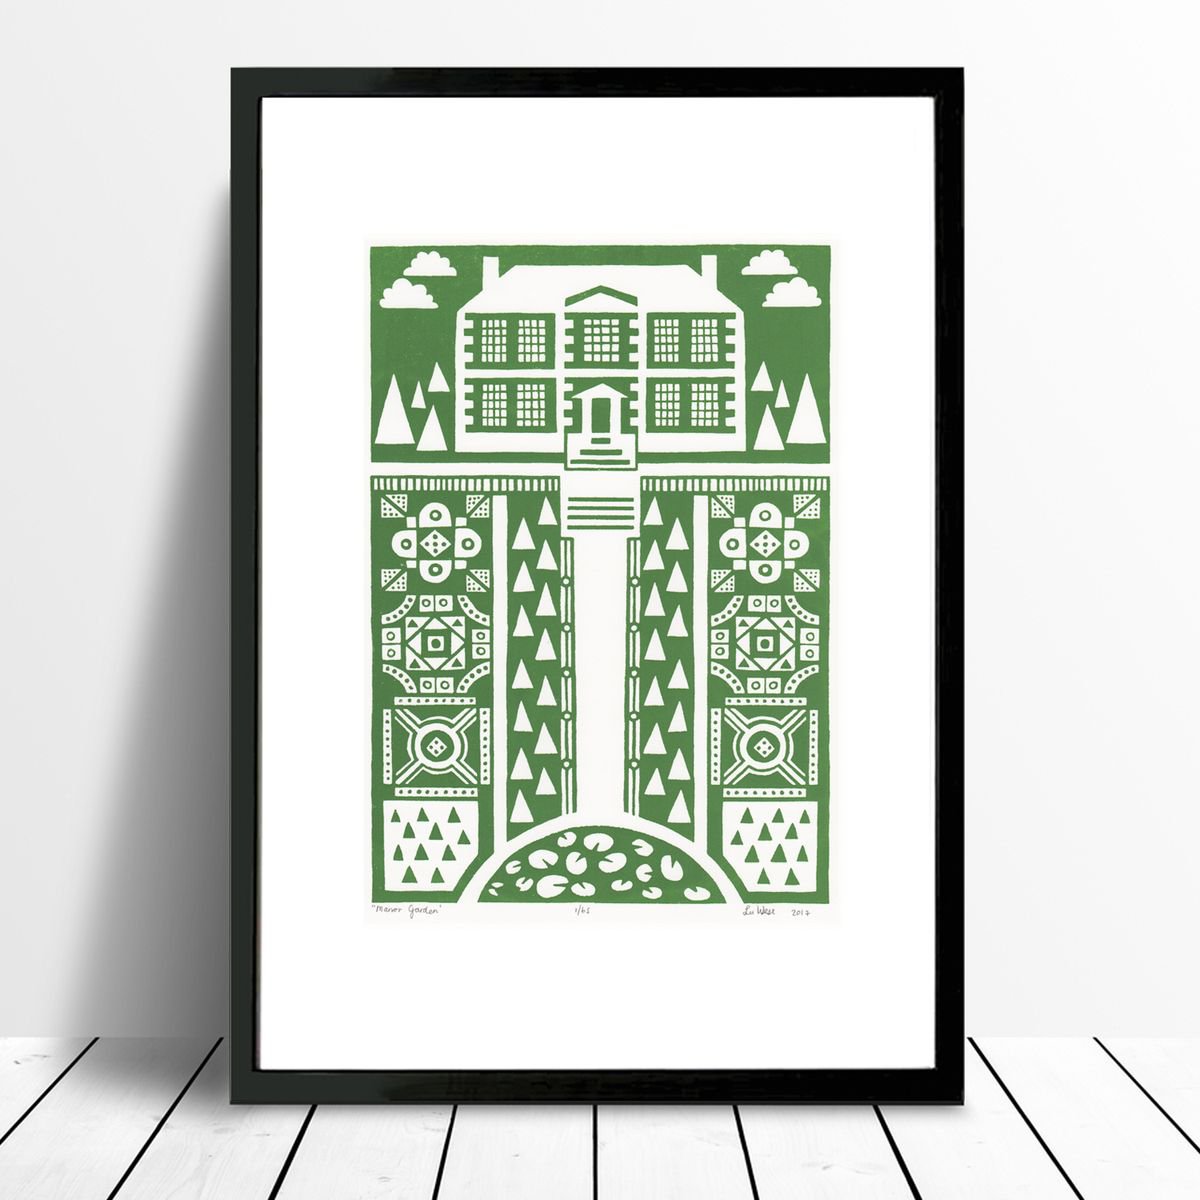 Manor Garden Print A3 Size in Heritage Green - Framed - FREE UK Delivery by Lu West